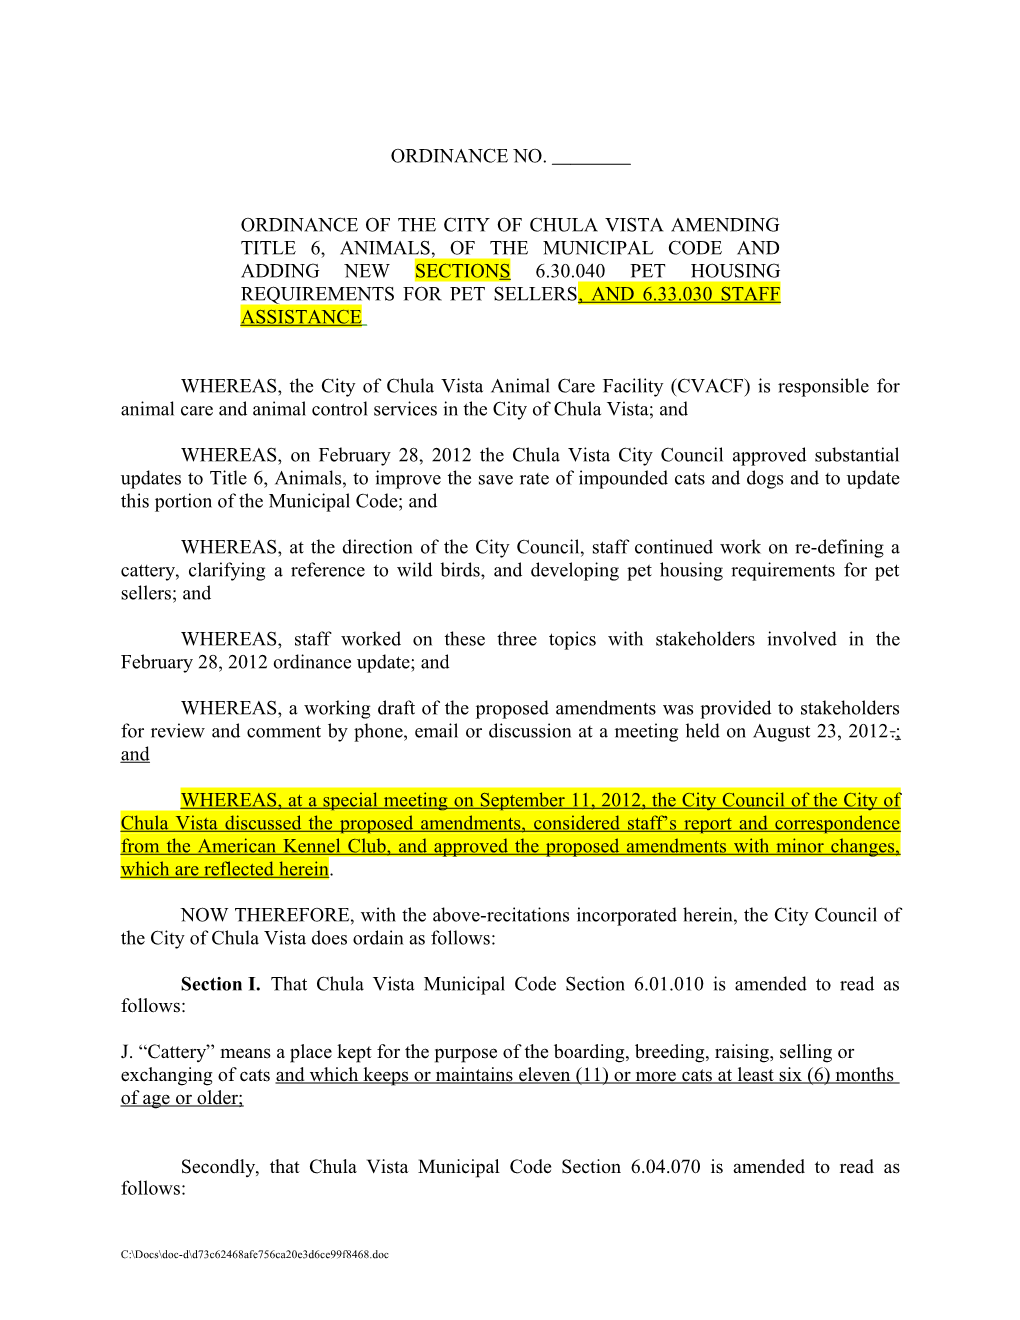 Ordinance of the City of Chula Vista Amending Title 6, Animals, of the Municipal Code And